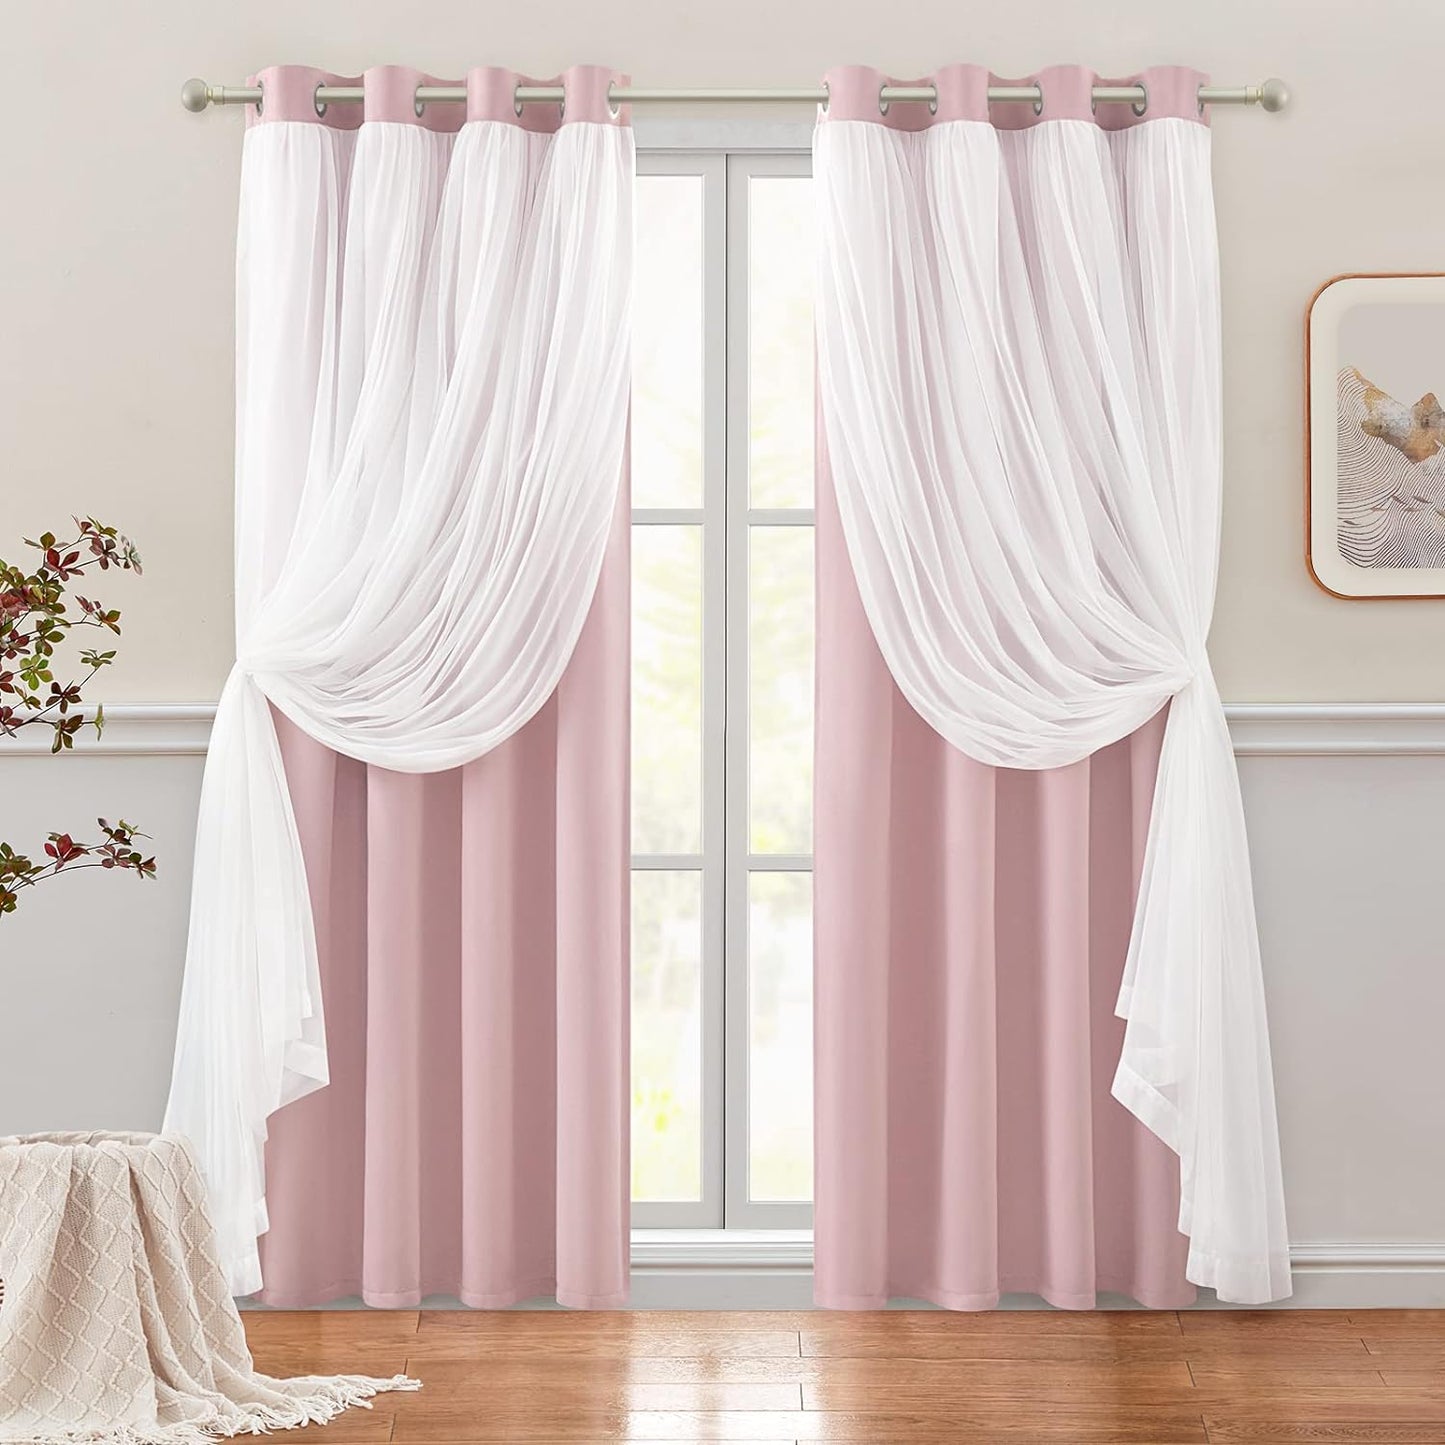 HOMEIDEAS Double Layer Curtains Light Grey Blackout Curtains 84 Inch Length 2 Panels Nursery Curtains for Girls Kids Bedroom Grommet Blackout Curtains with Sheer Overlay  HOMEIDEAS Pink 52" X 84" 